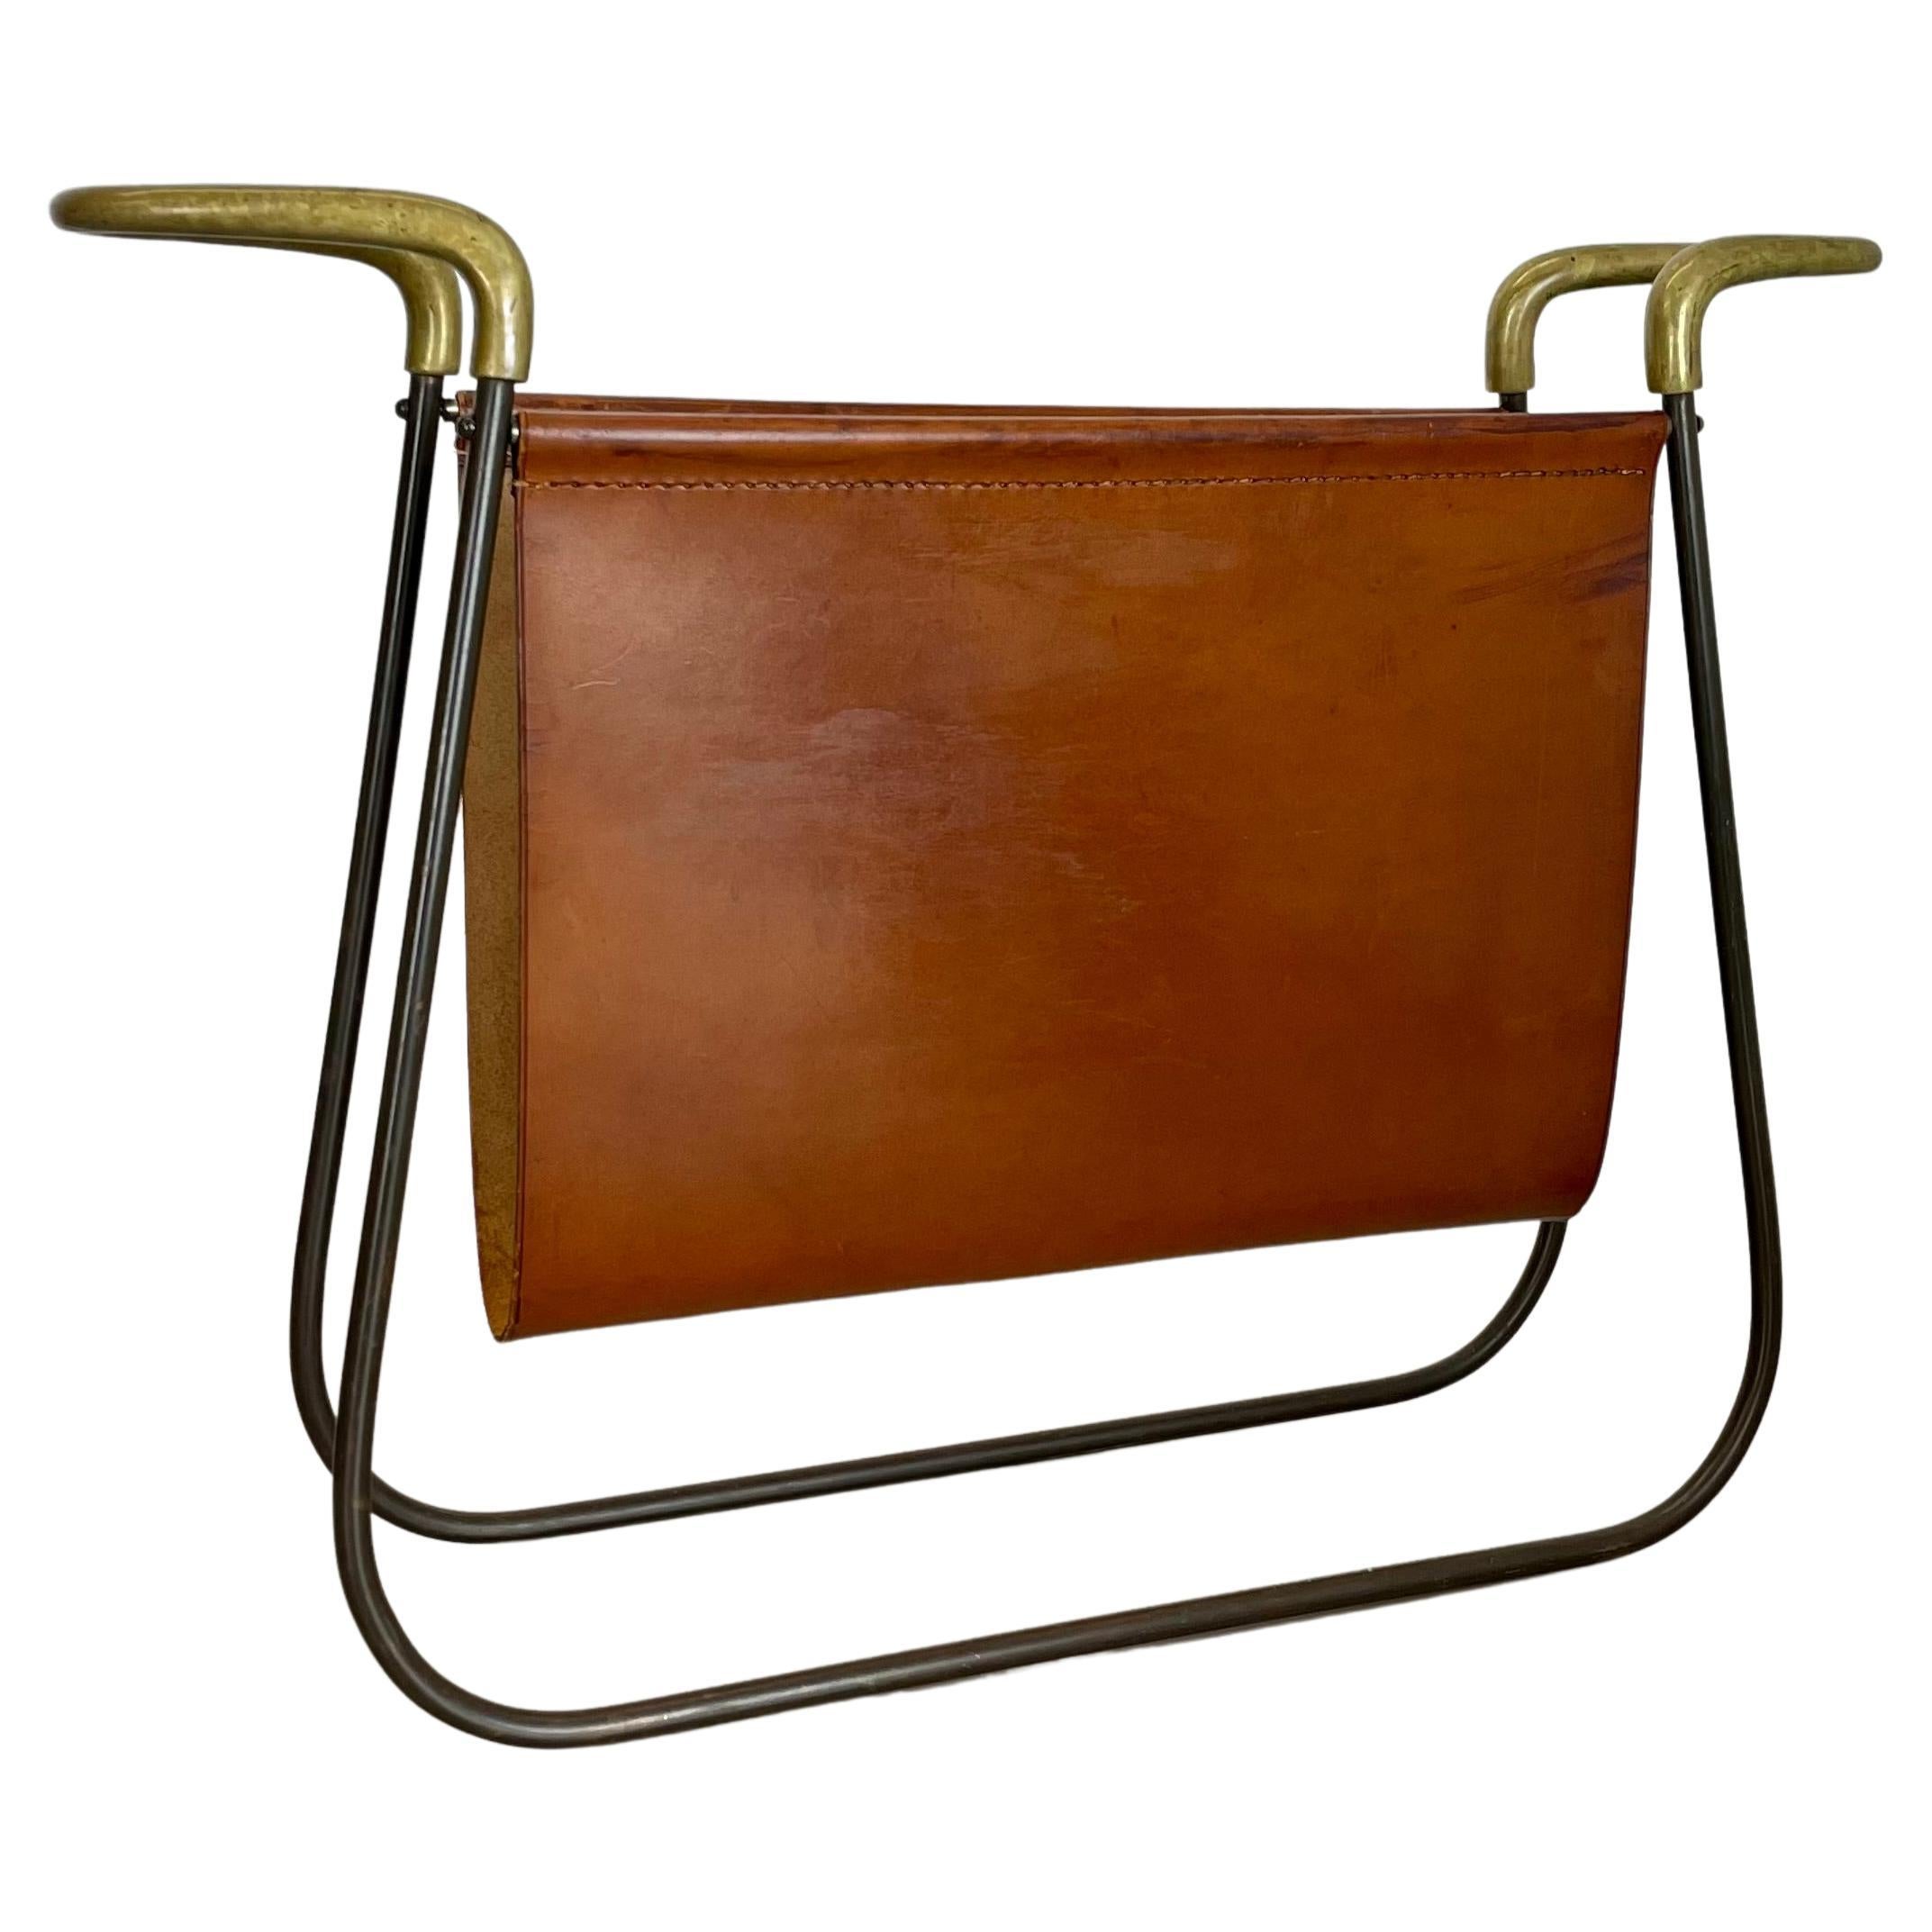 rare Brass and Brown Leather Magazine Holder Model by Carl Auböck, Austria 1950s